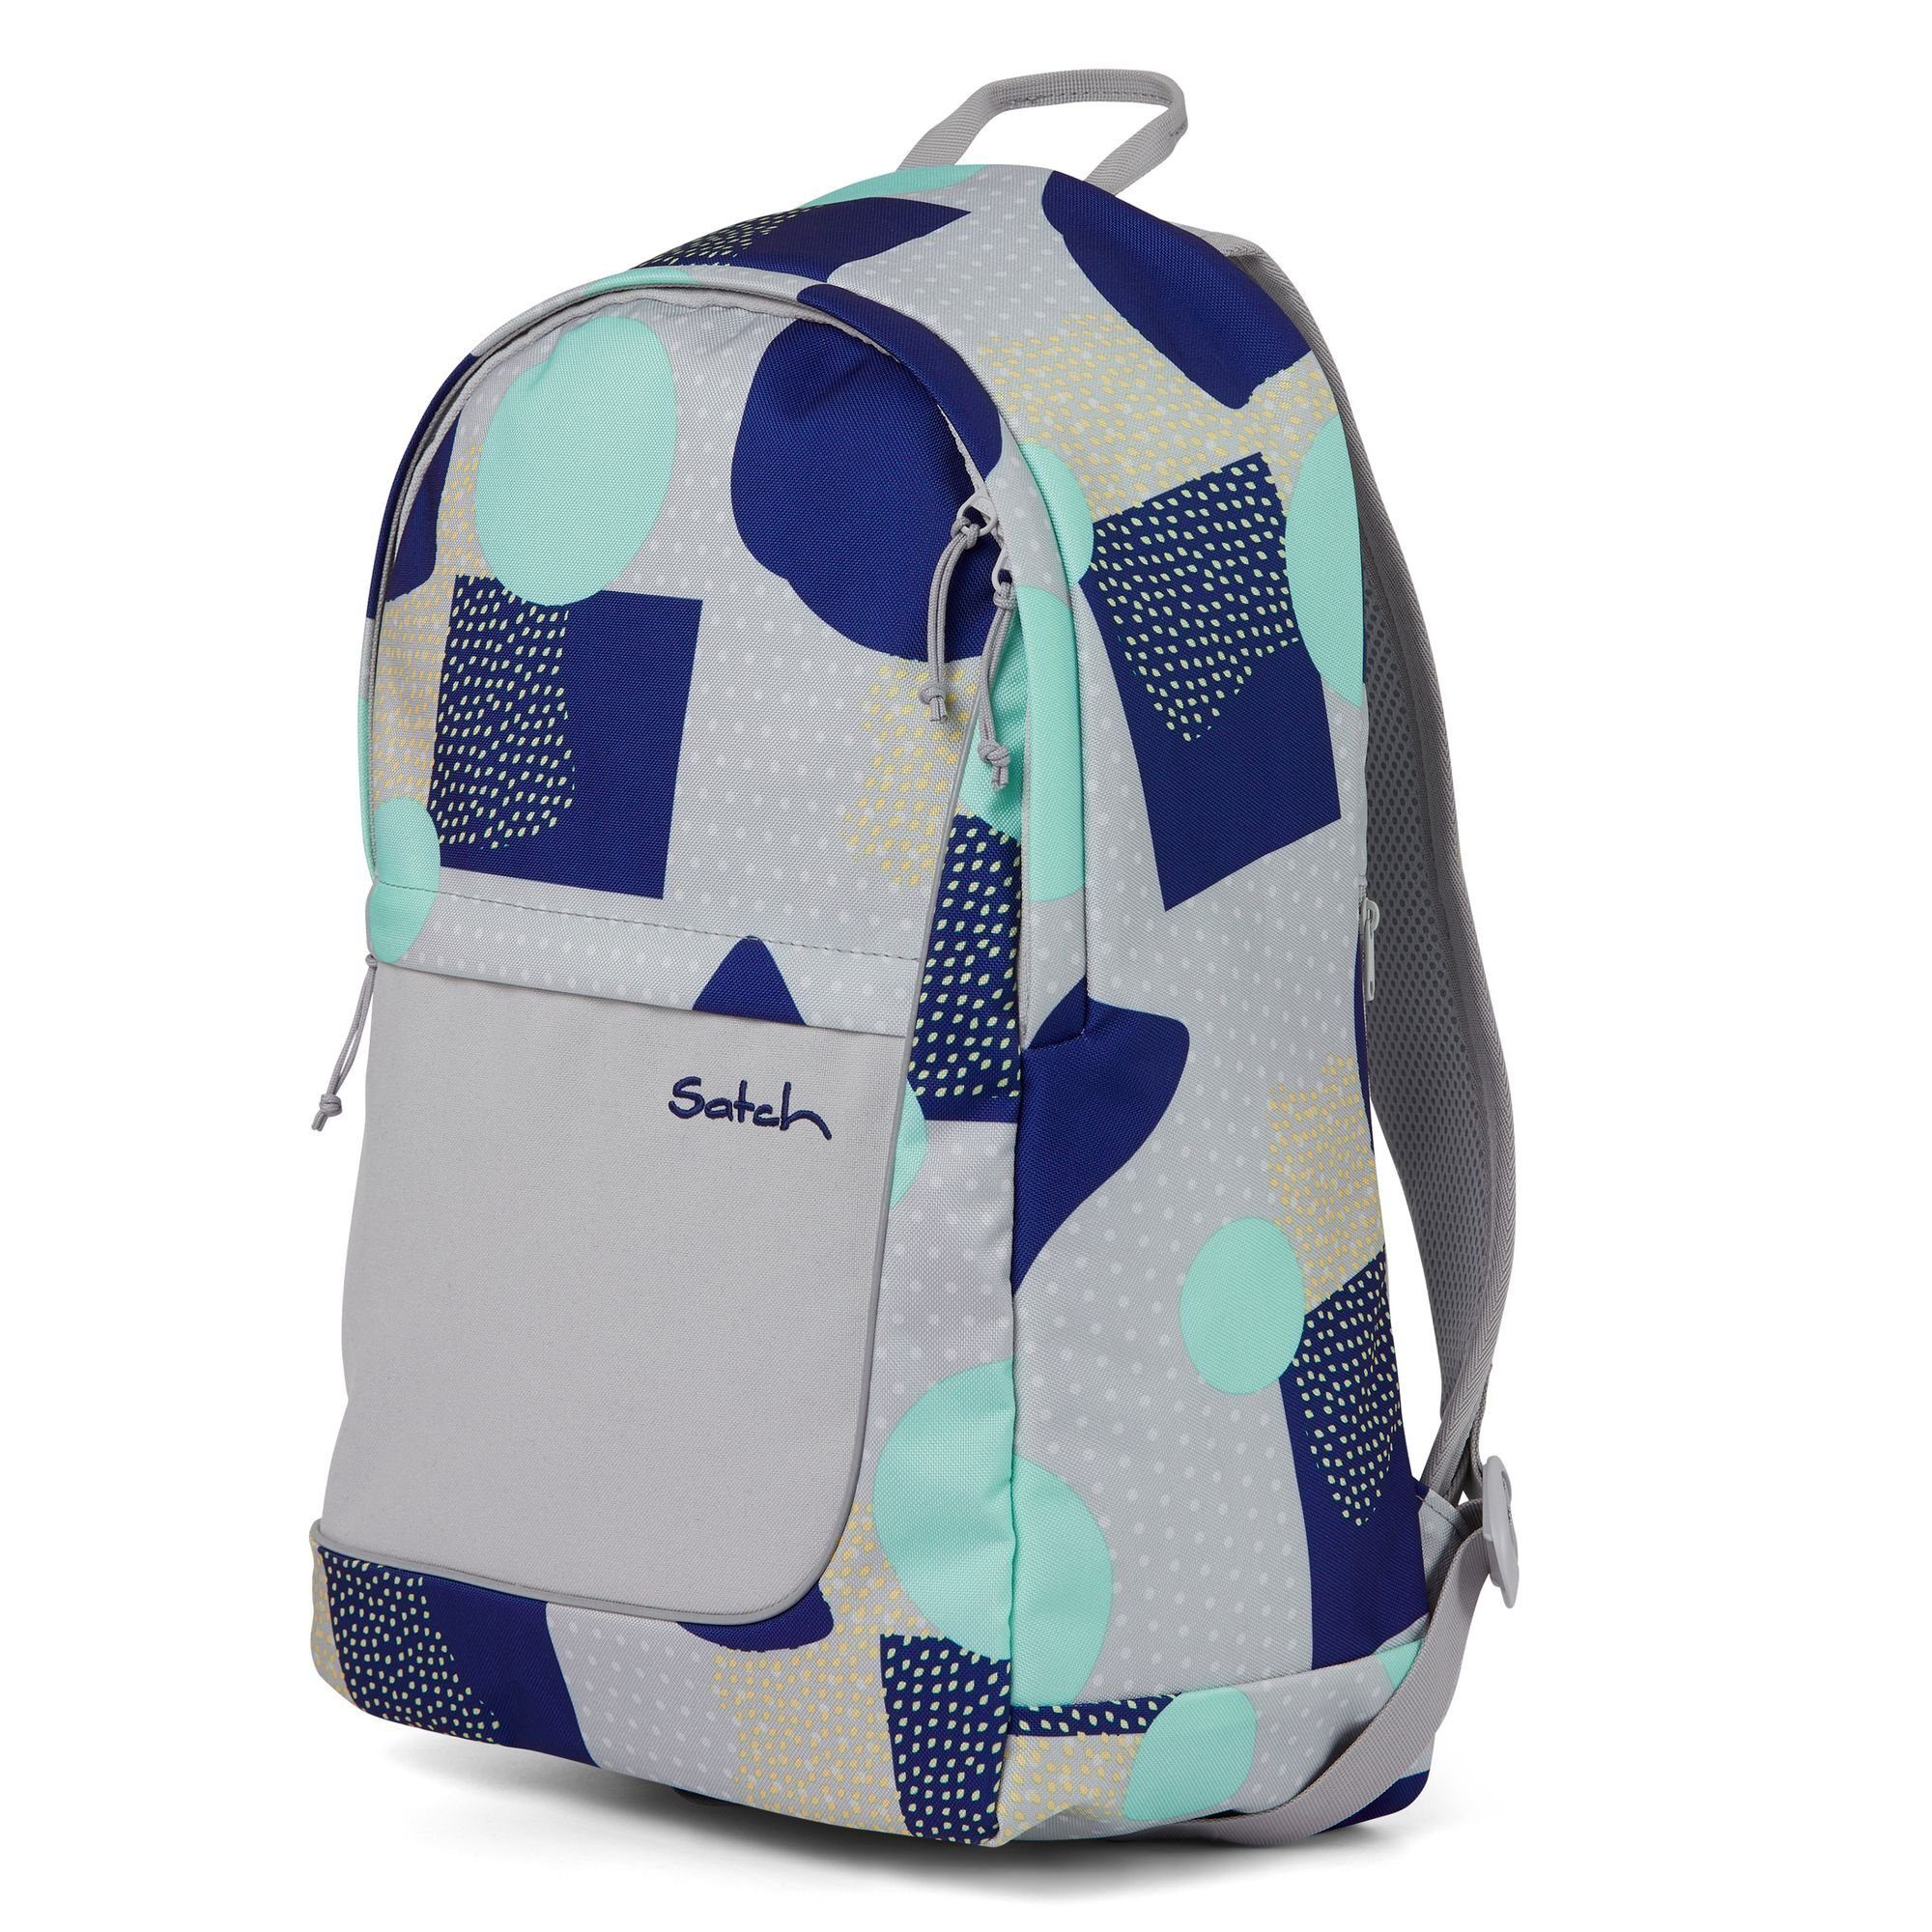 Daypack turquoise PET fly, blue grey Satch